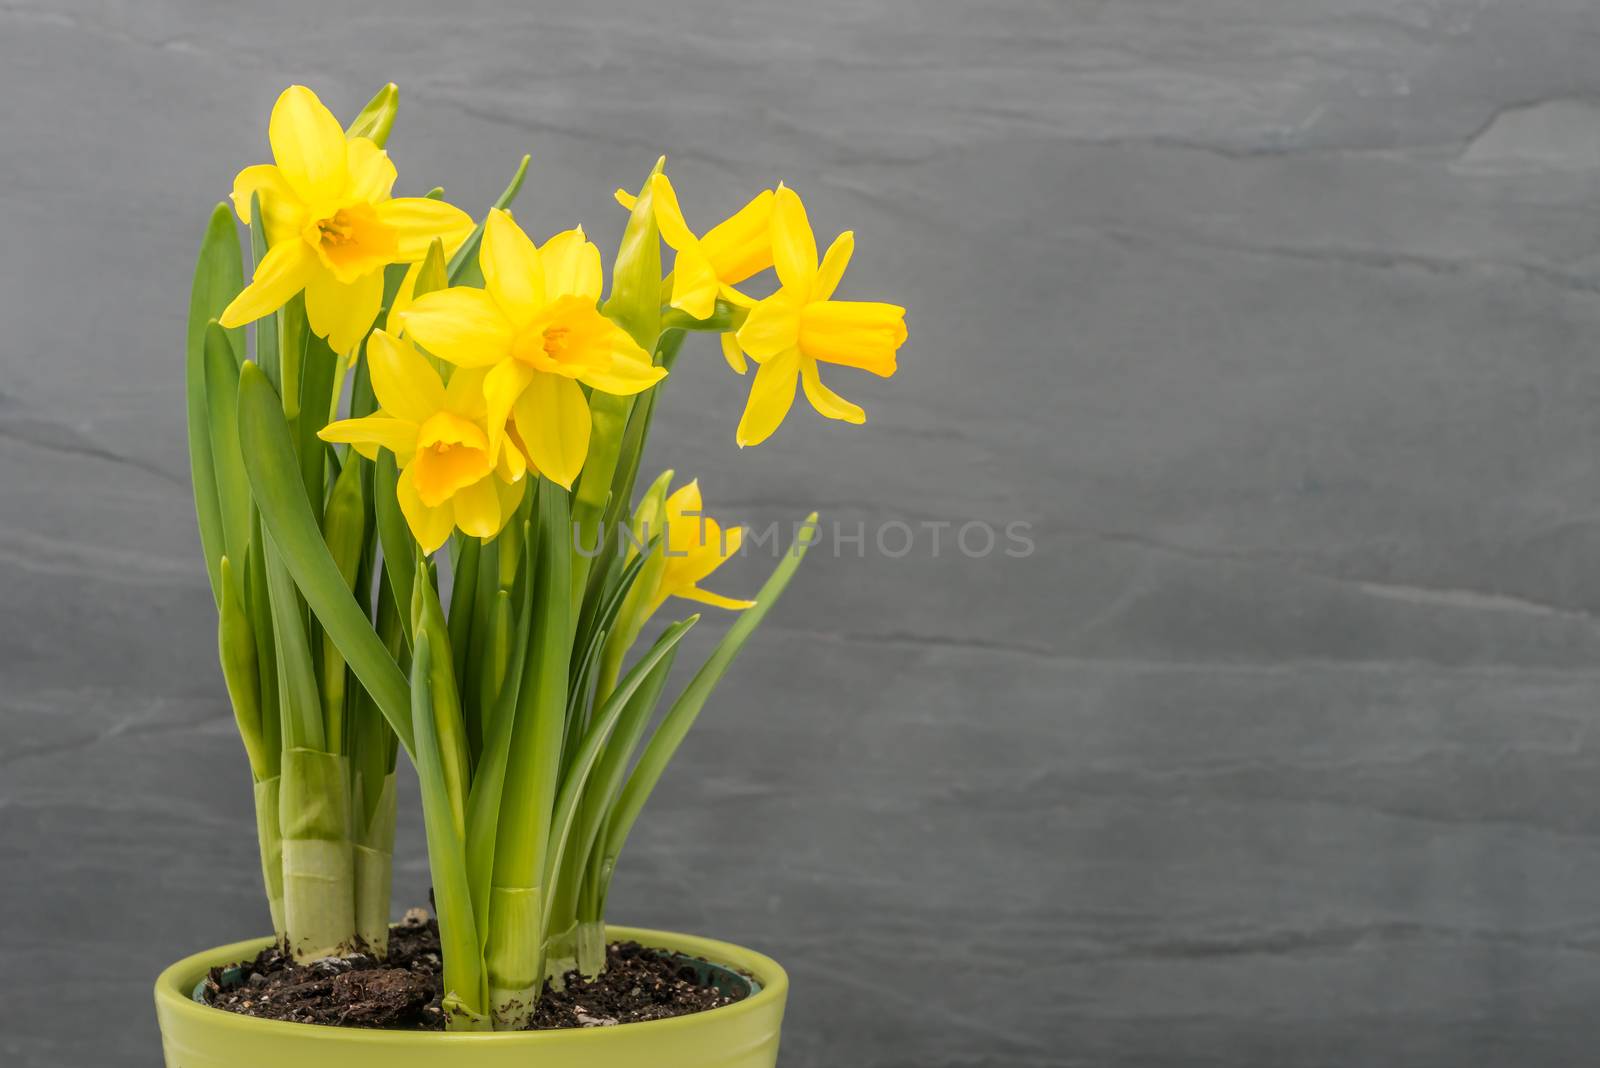 Yellow daffodils in a pot against a gray slate background.